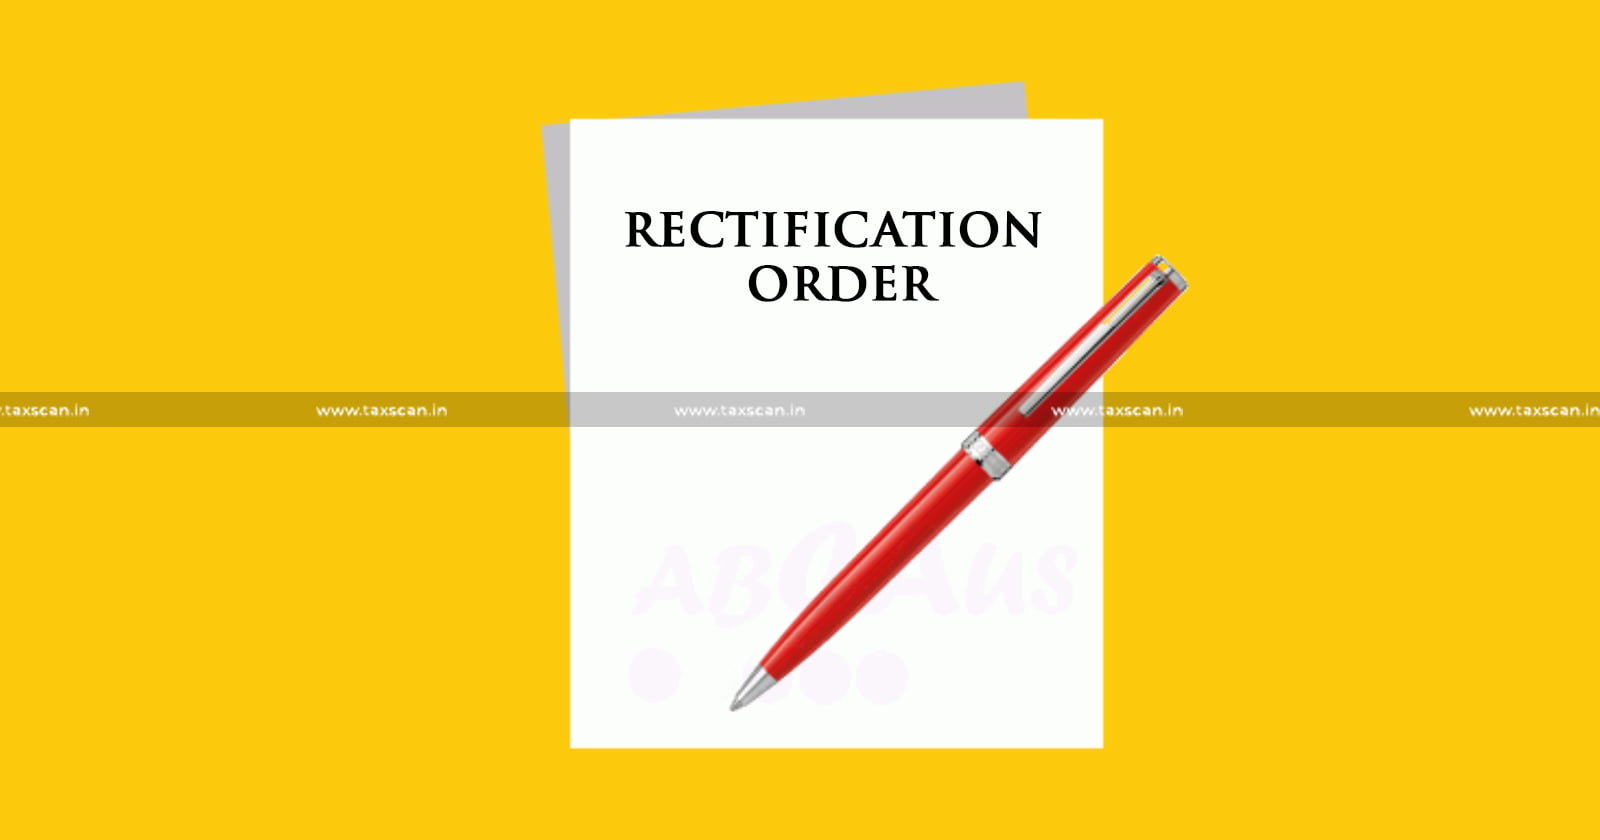 Penalty - Penalty imposed - AO for passing Rectification Order - passing Rectification Order - Rectification Order - ITAT - Taxscan